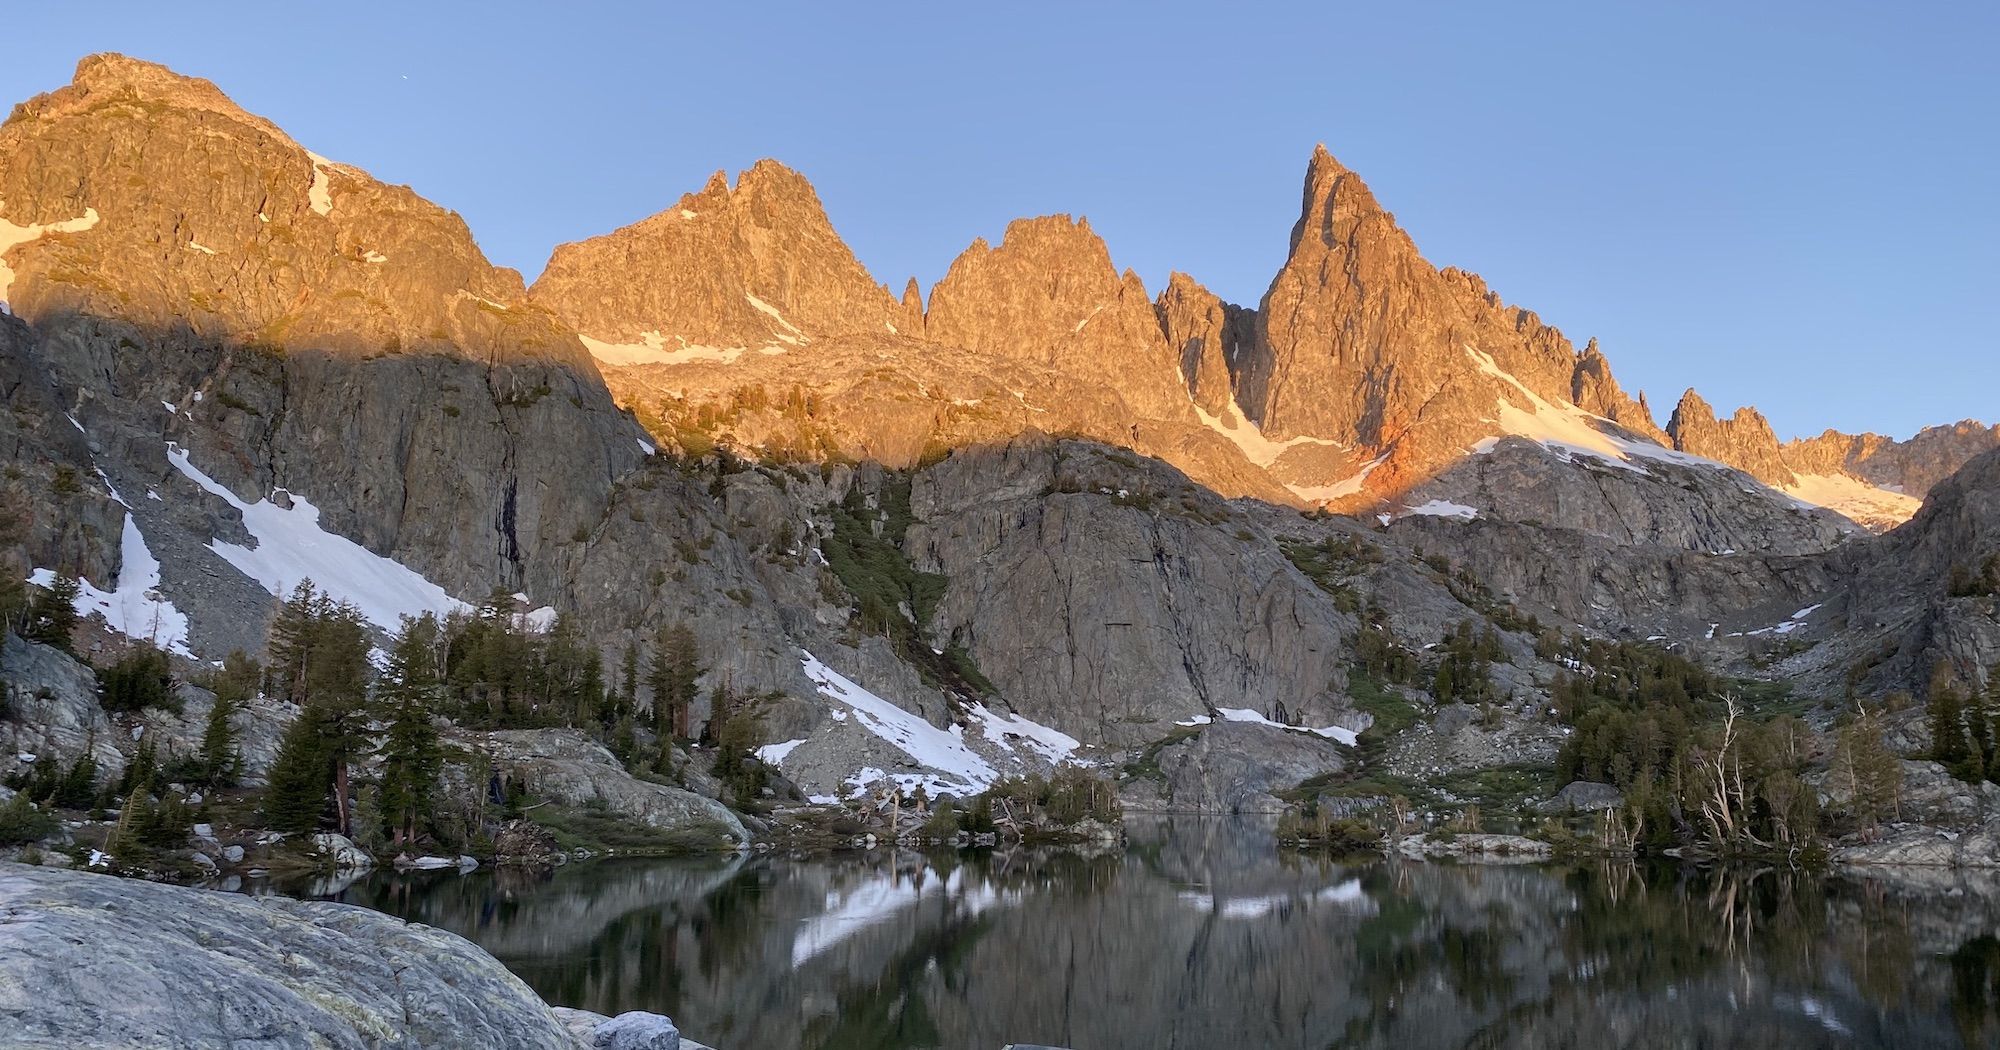 Awesome 3-night JMT & PCT backpacking trip in Ansel Adams